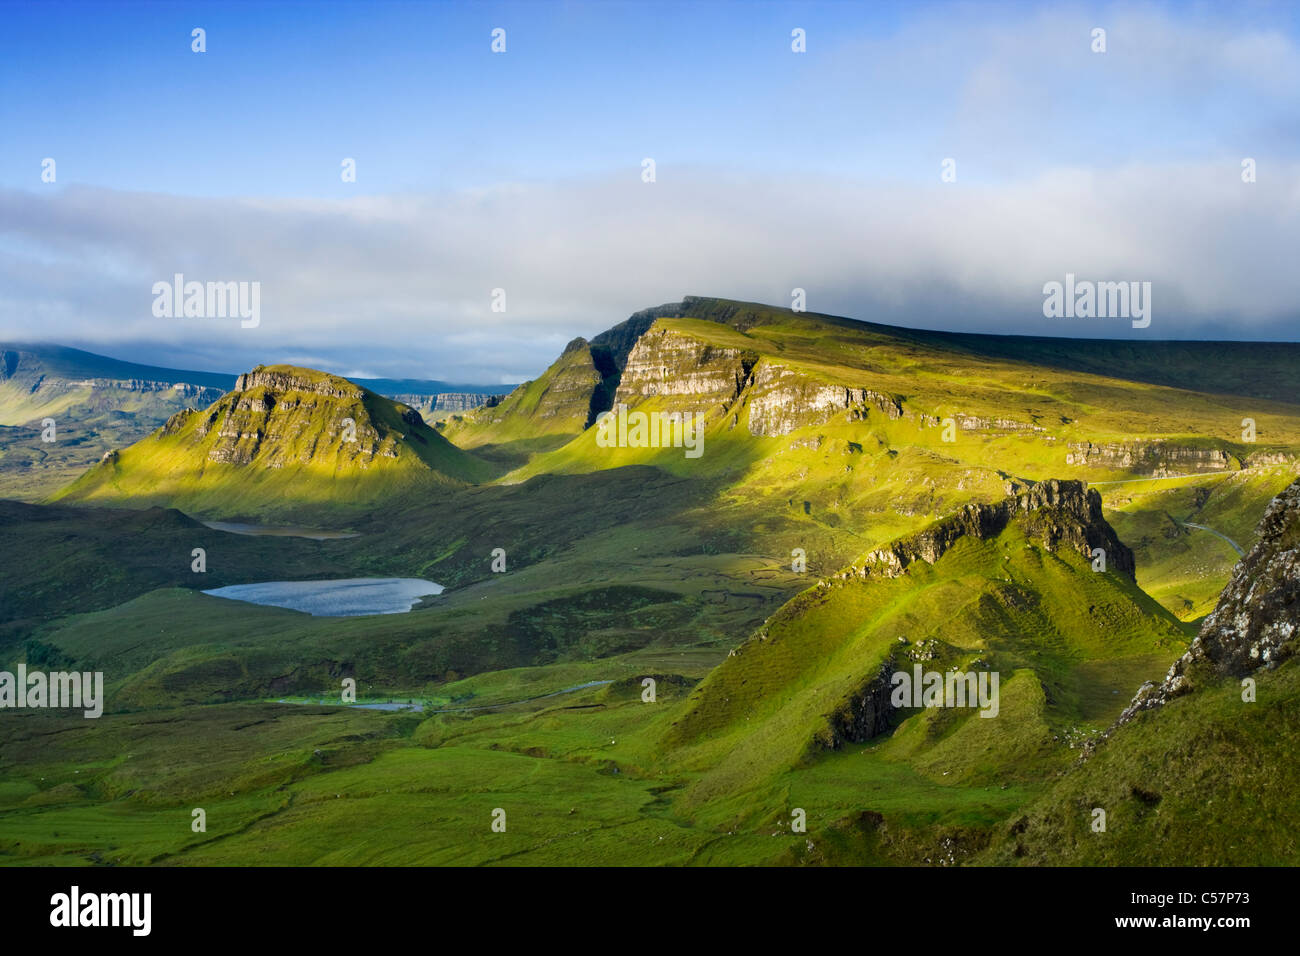 Le Quiraing, Isle of Skye, Scotland, UK. Banque D'Images